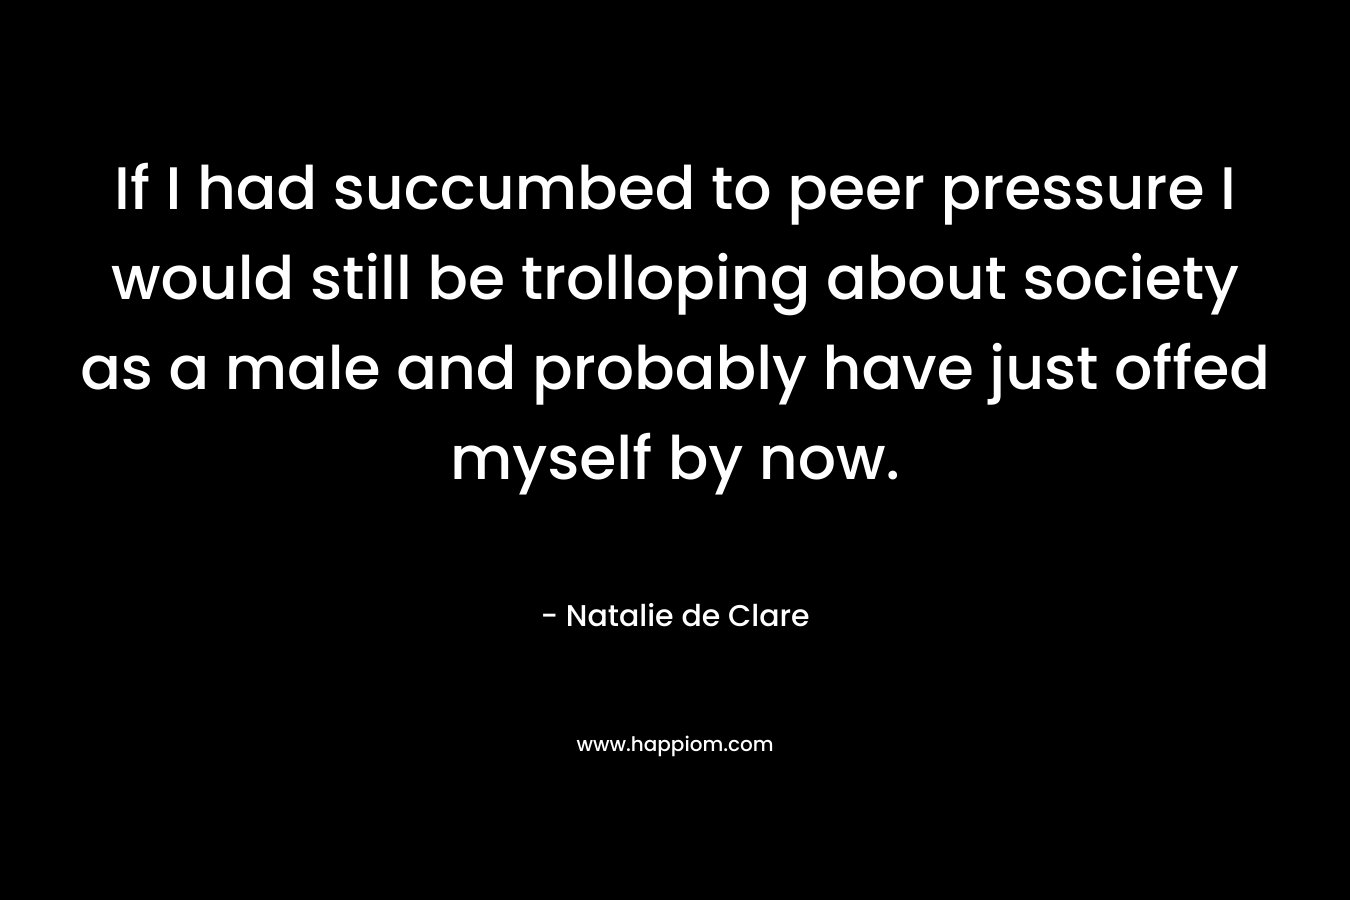 If I had succumbed to peer pressure I would still be trolloping about society as a male and probably have just offed myself by now. – Natalie de Clare